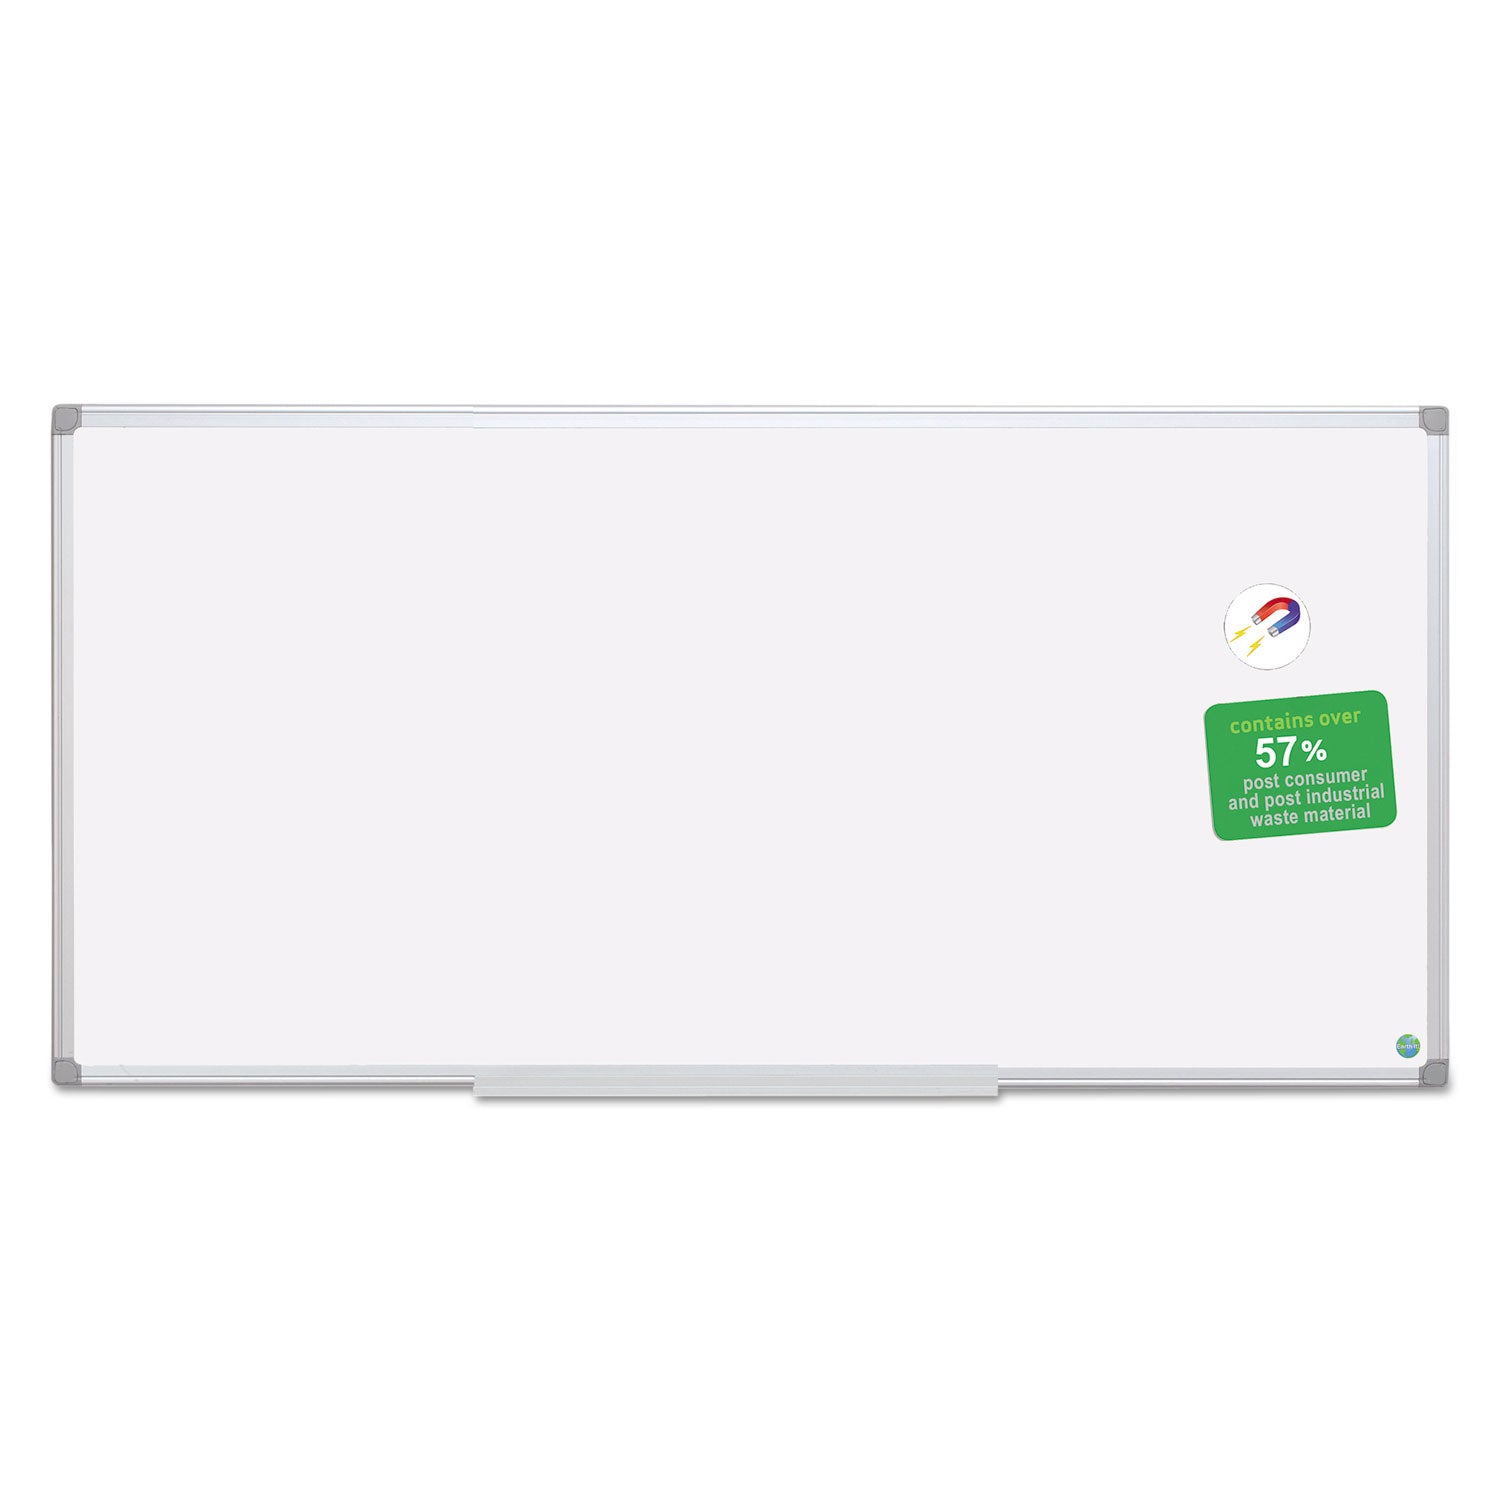 earth-silver-easy-clean-dry-erase-board-96-x-48-white-surface-silver-aluminum-frame_bvccr1520790 - 2